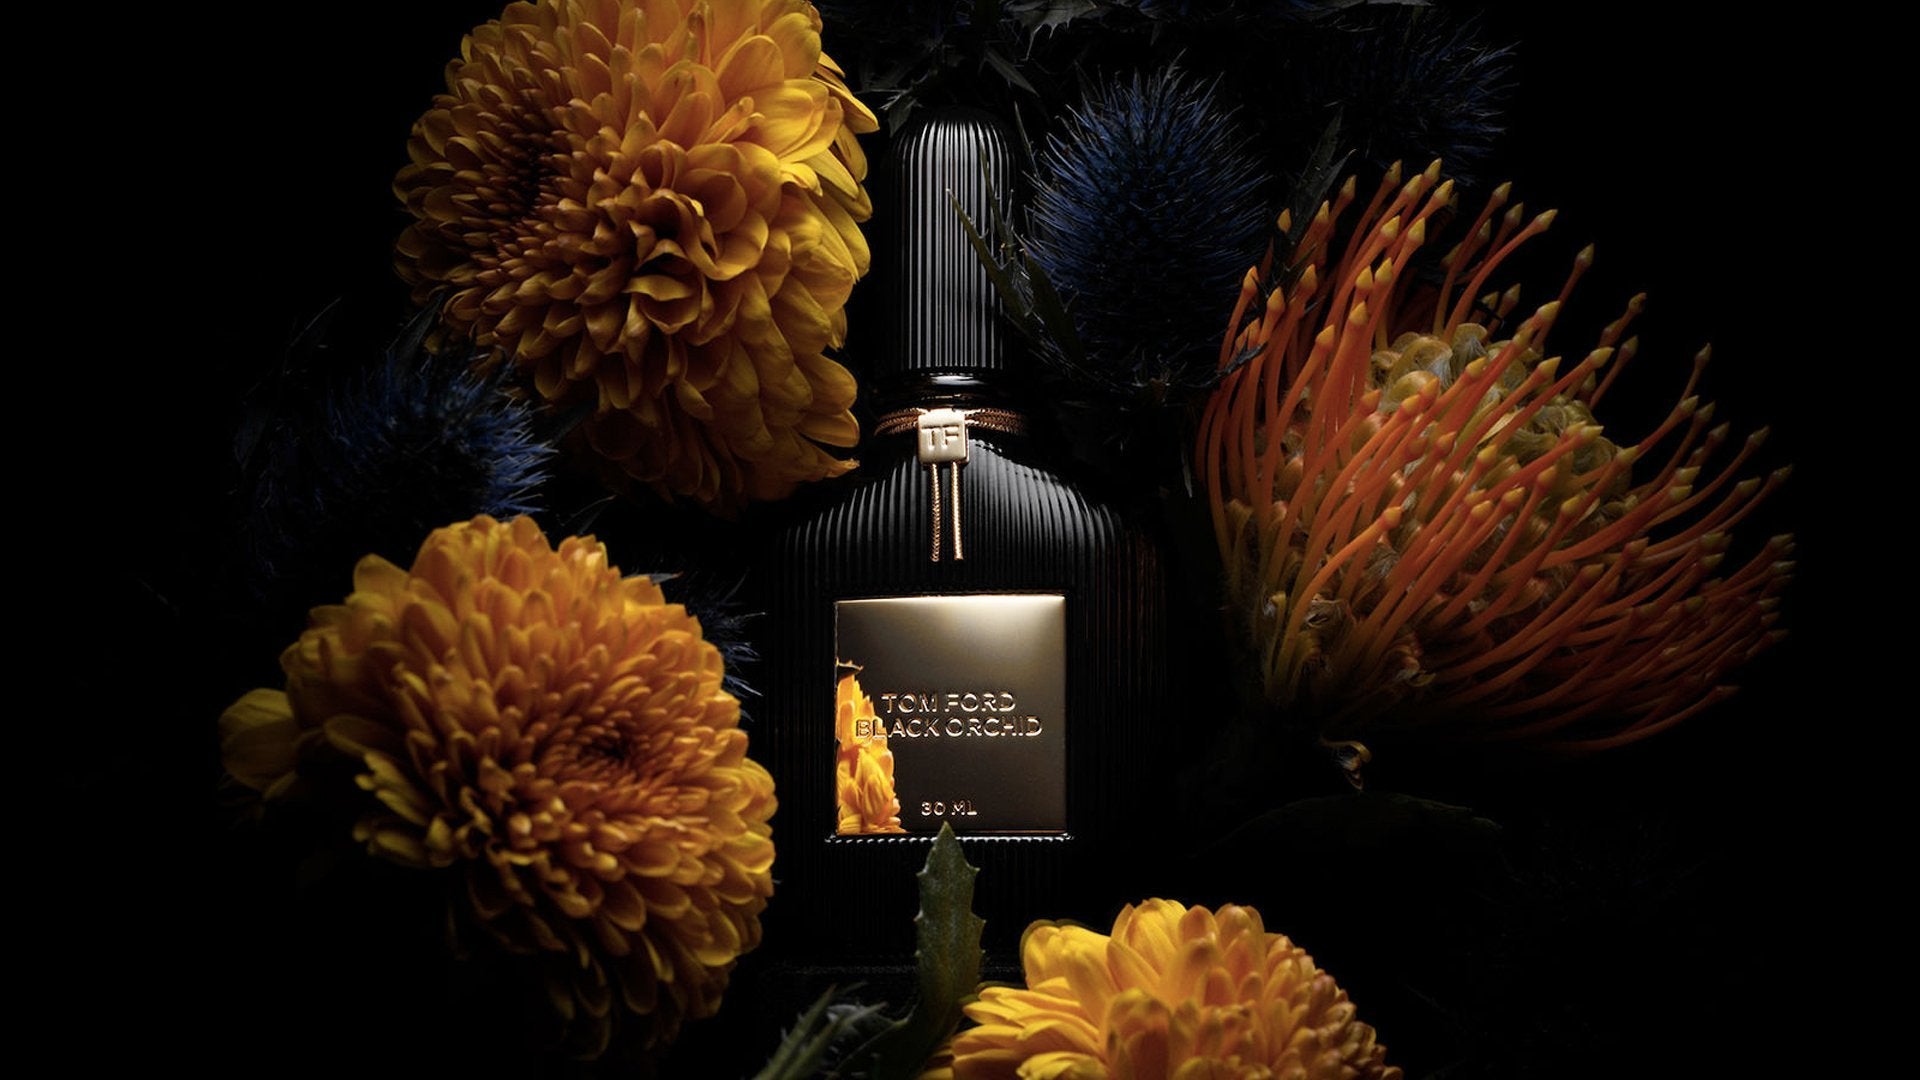 TOM FORD Velvet Orchid vs. Black Orchid: What\'s the Difference?